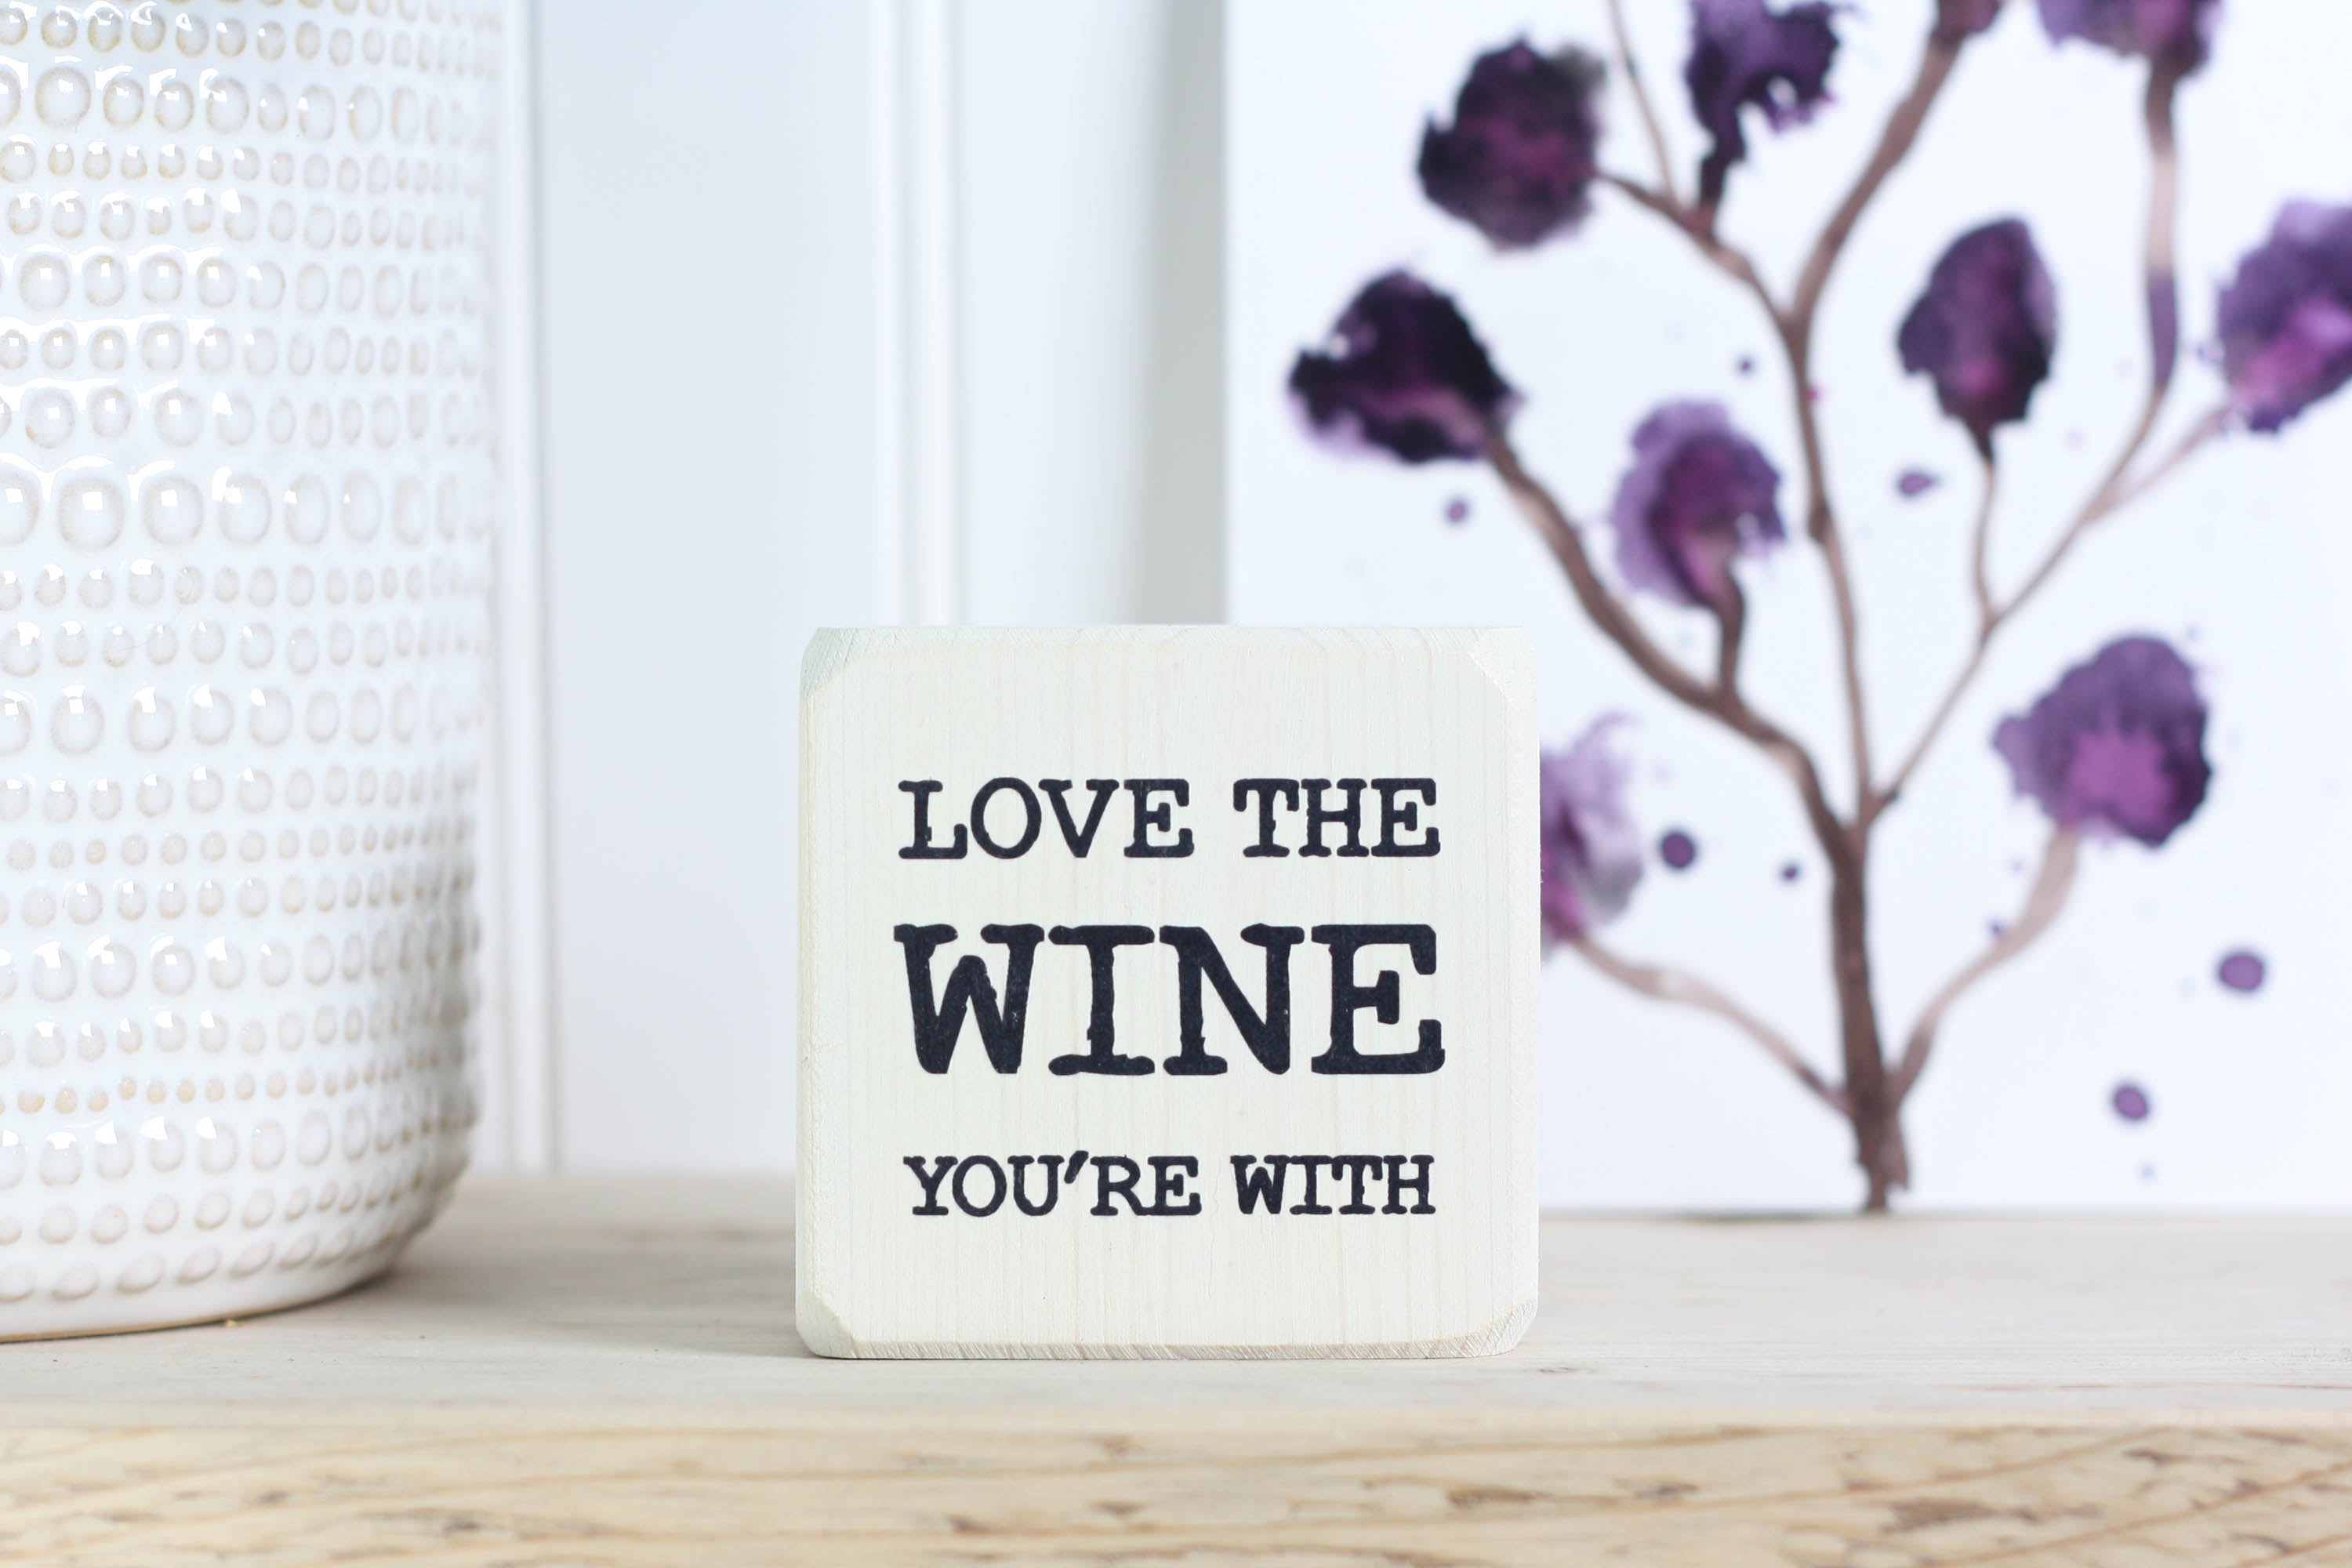 Mini wood bar sign in whitewash with the saying "Love the wine you're with".